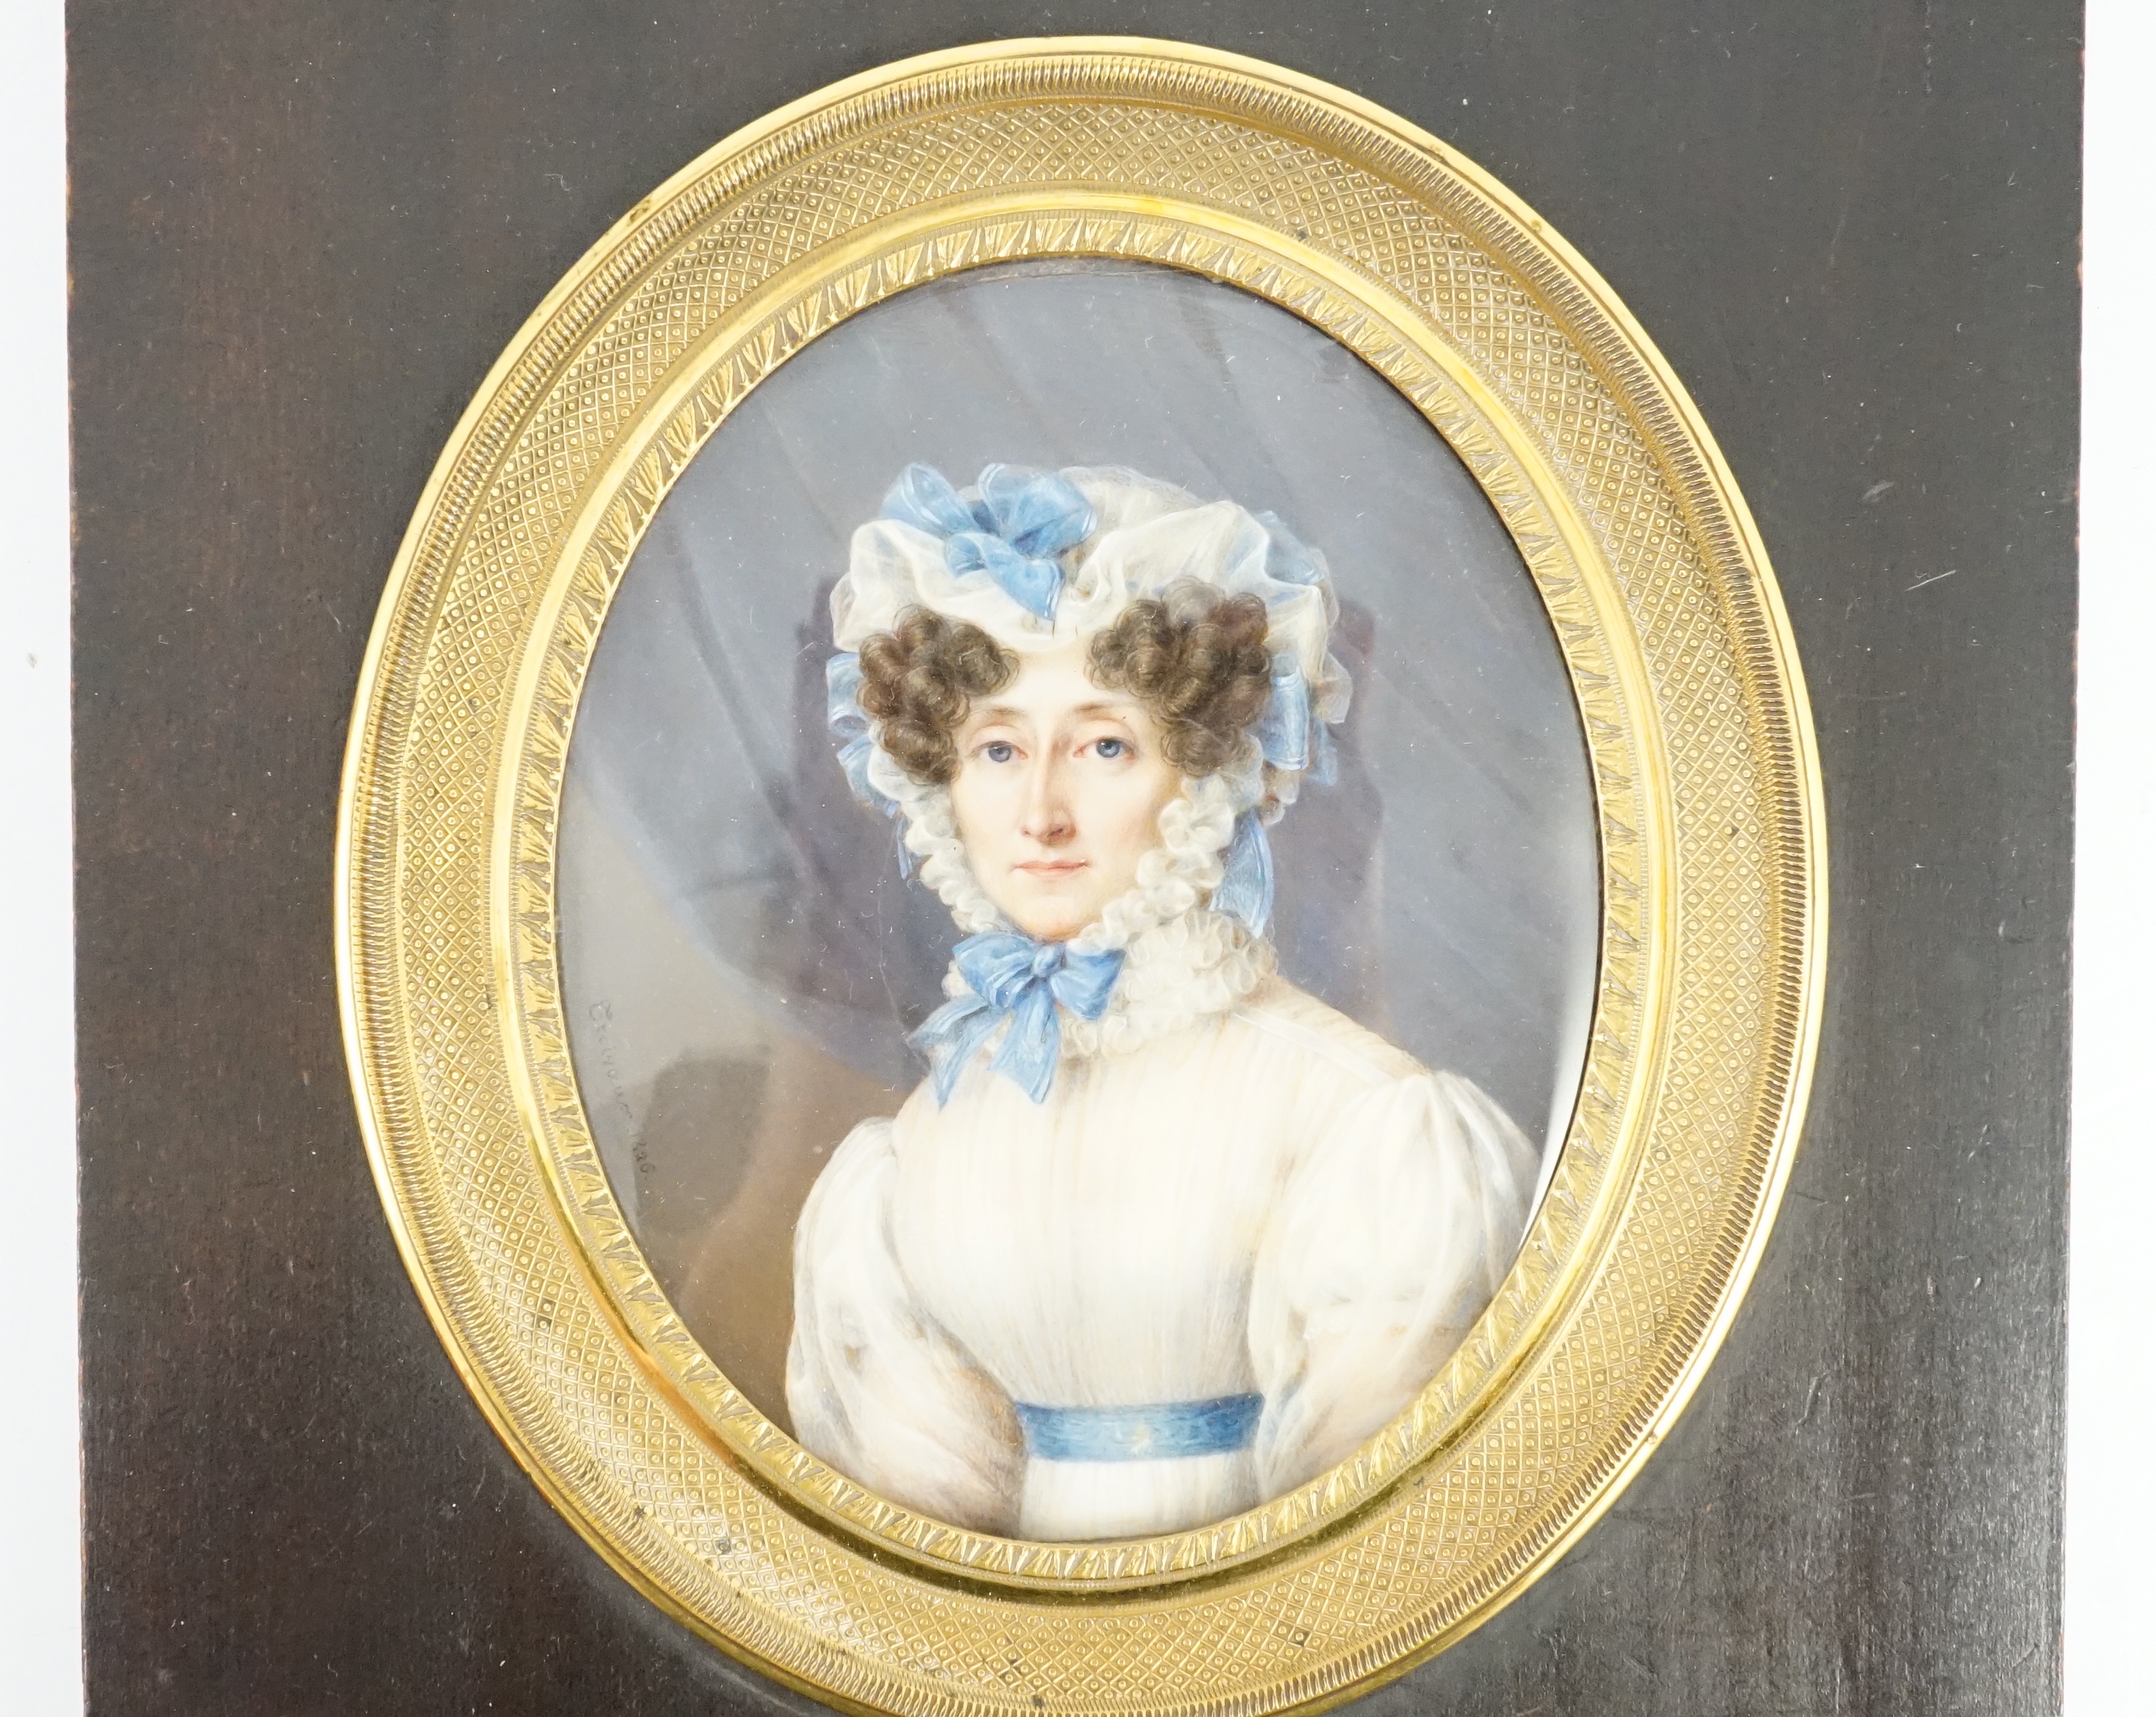 Jean Baptiste Désiré Troivaux (French, 1788-1860), Portrait miniature of a lady, half length, wearing white with a blue sash and blue ribbon-trimmed bonnet, watercolour on ivory, 8.8 x 7.2cm. CITES Submission reference G